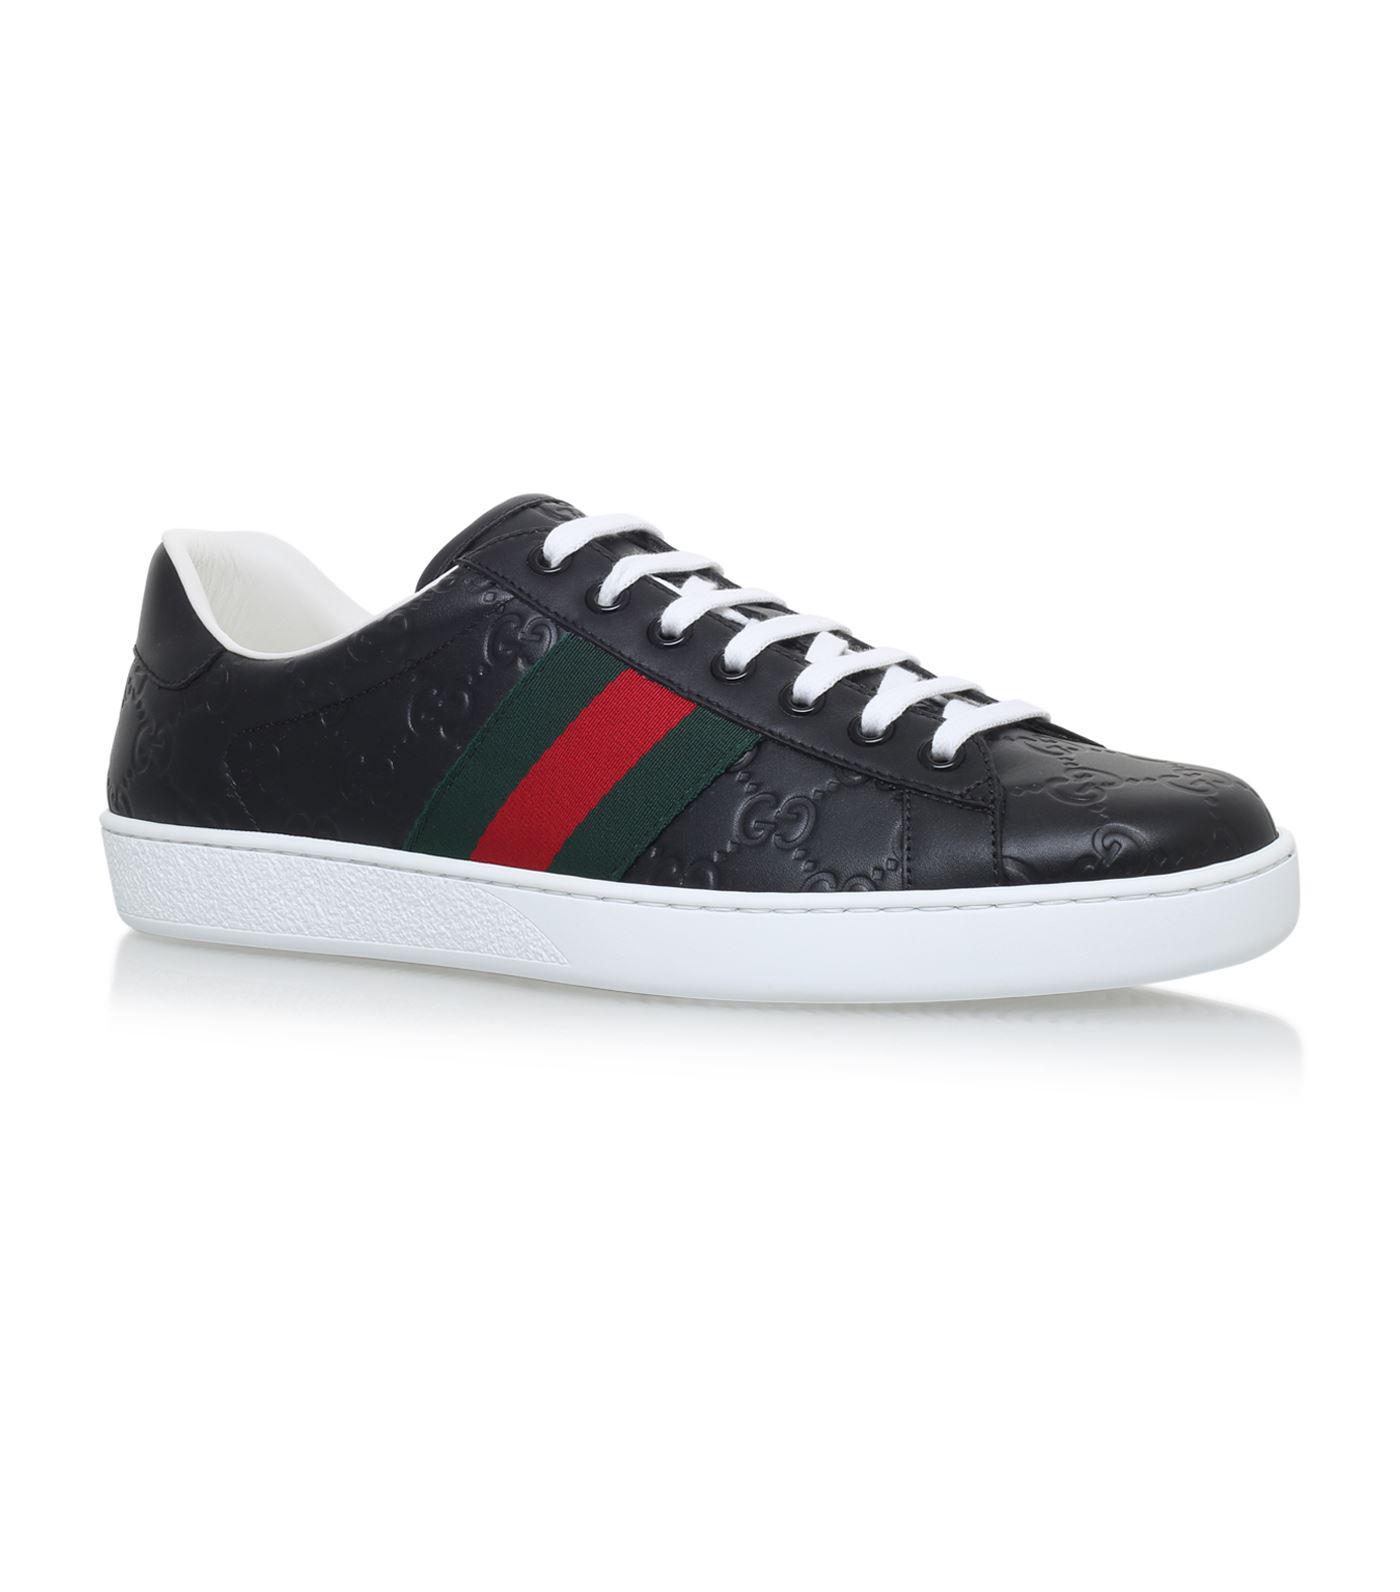 Lyst - Gucci New Ace Logo Sneakers in Blue for Men